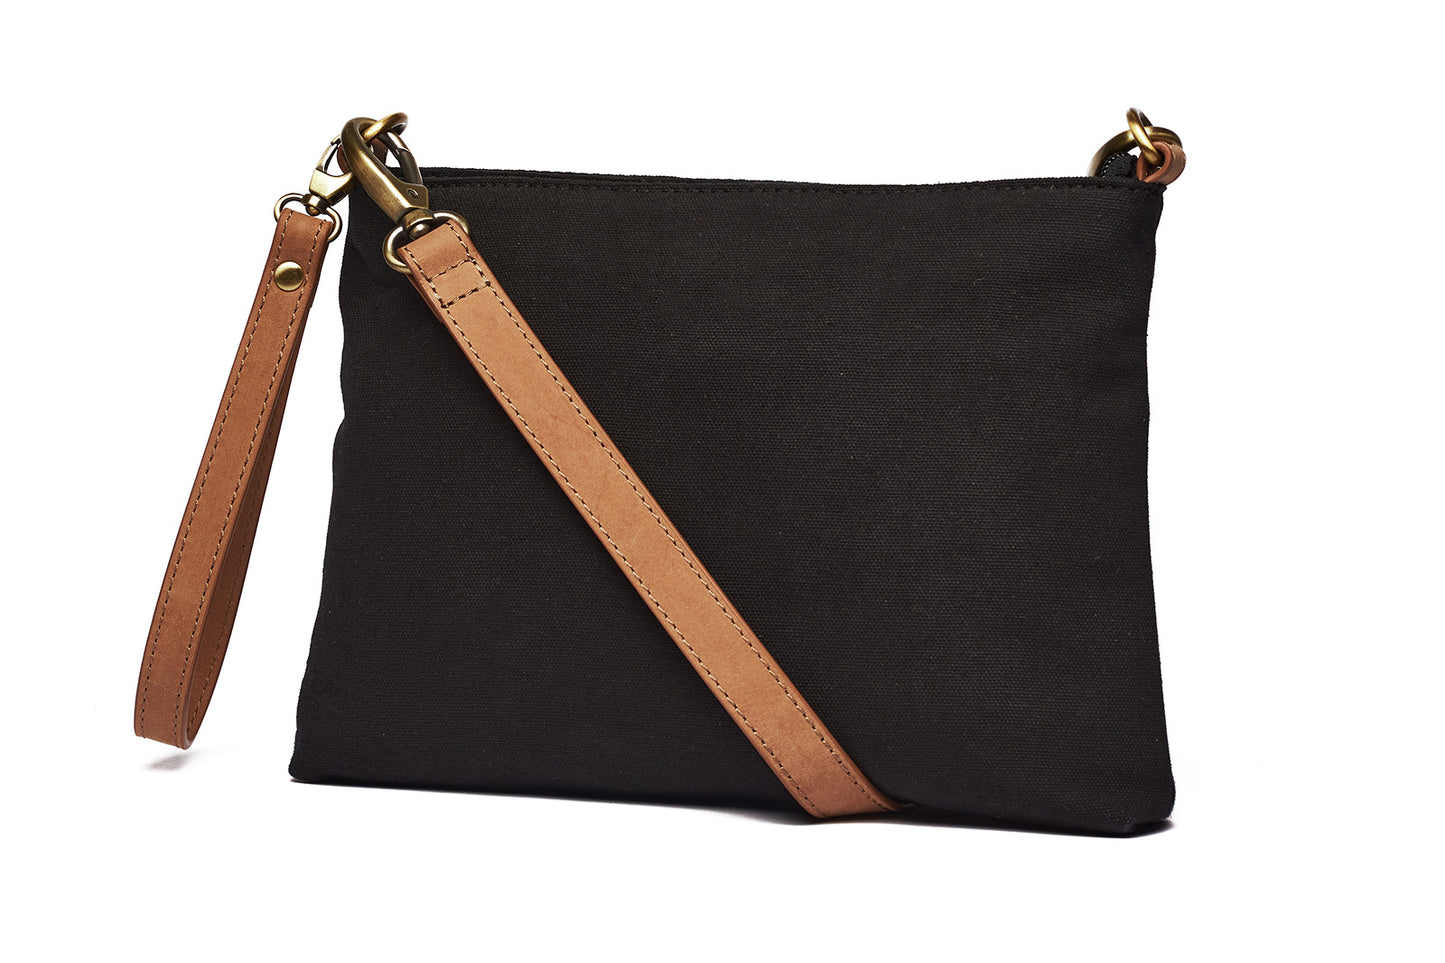 RUGGED HIDE ATHENA CANVAS POUCH